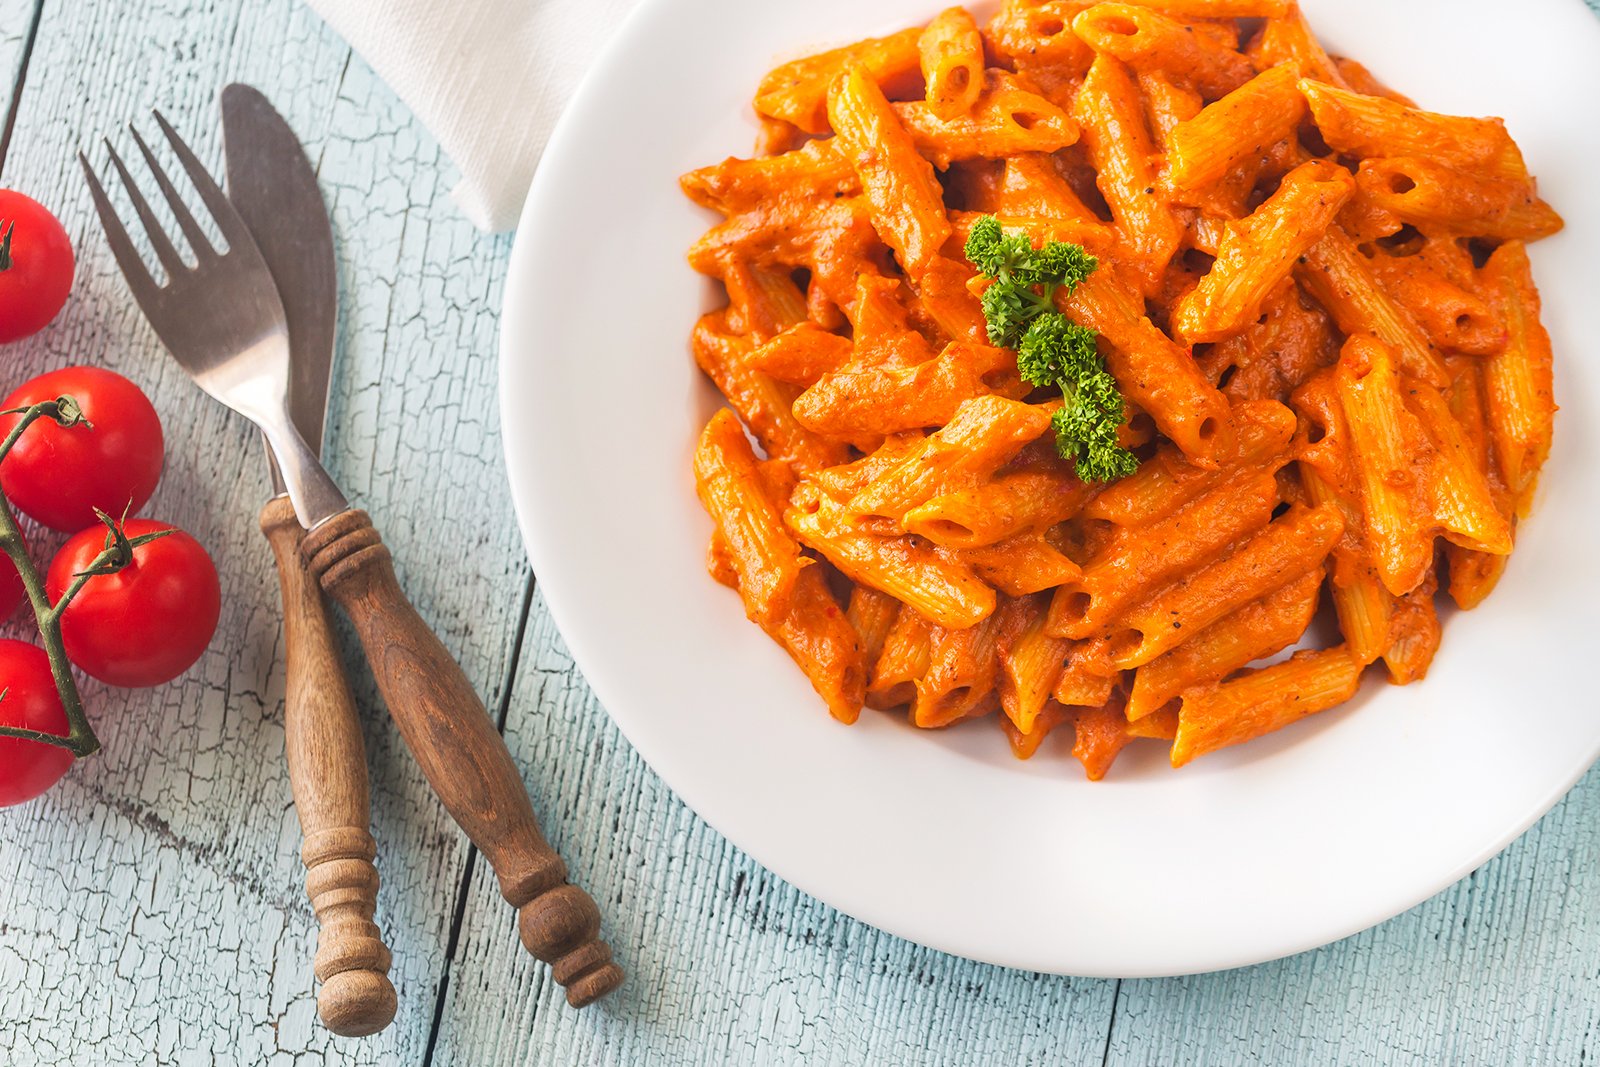 Penne ala vodka on plate with utensils and tomatoes on the side